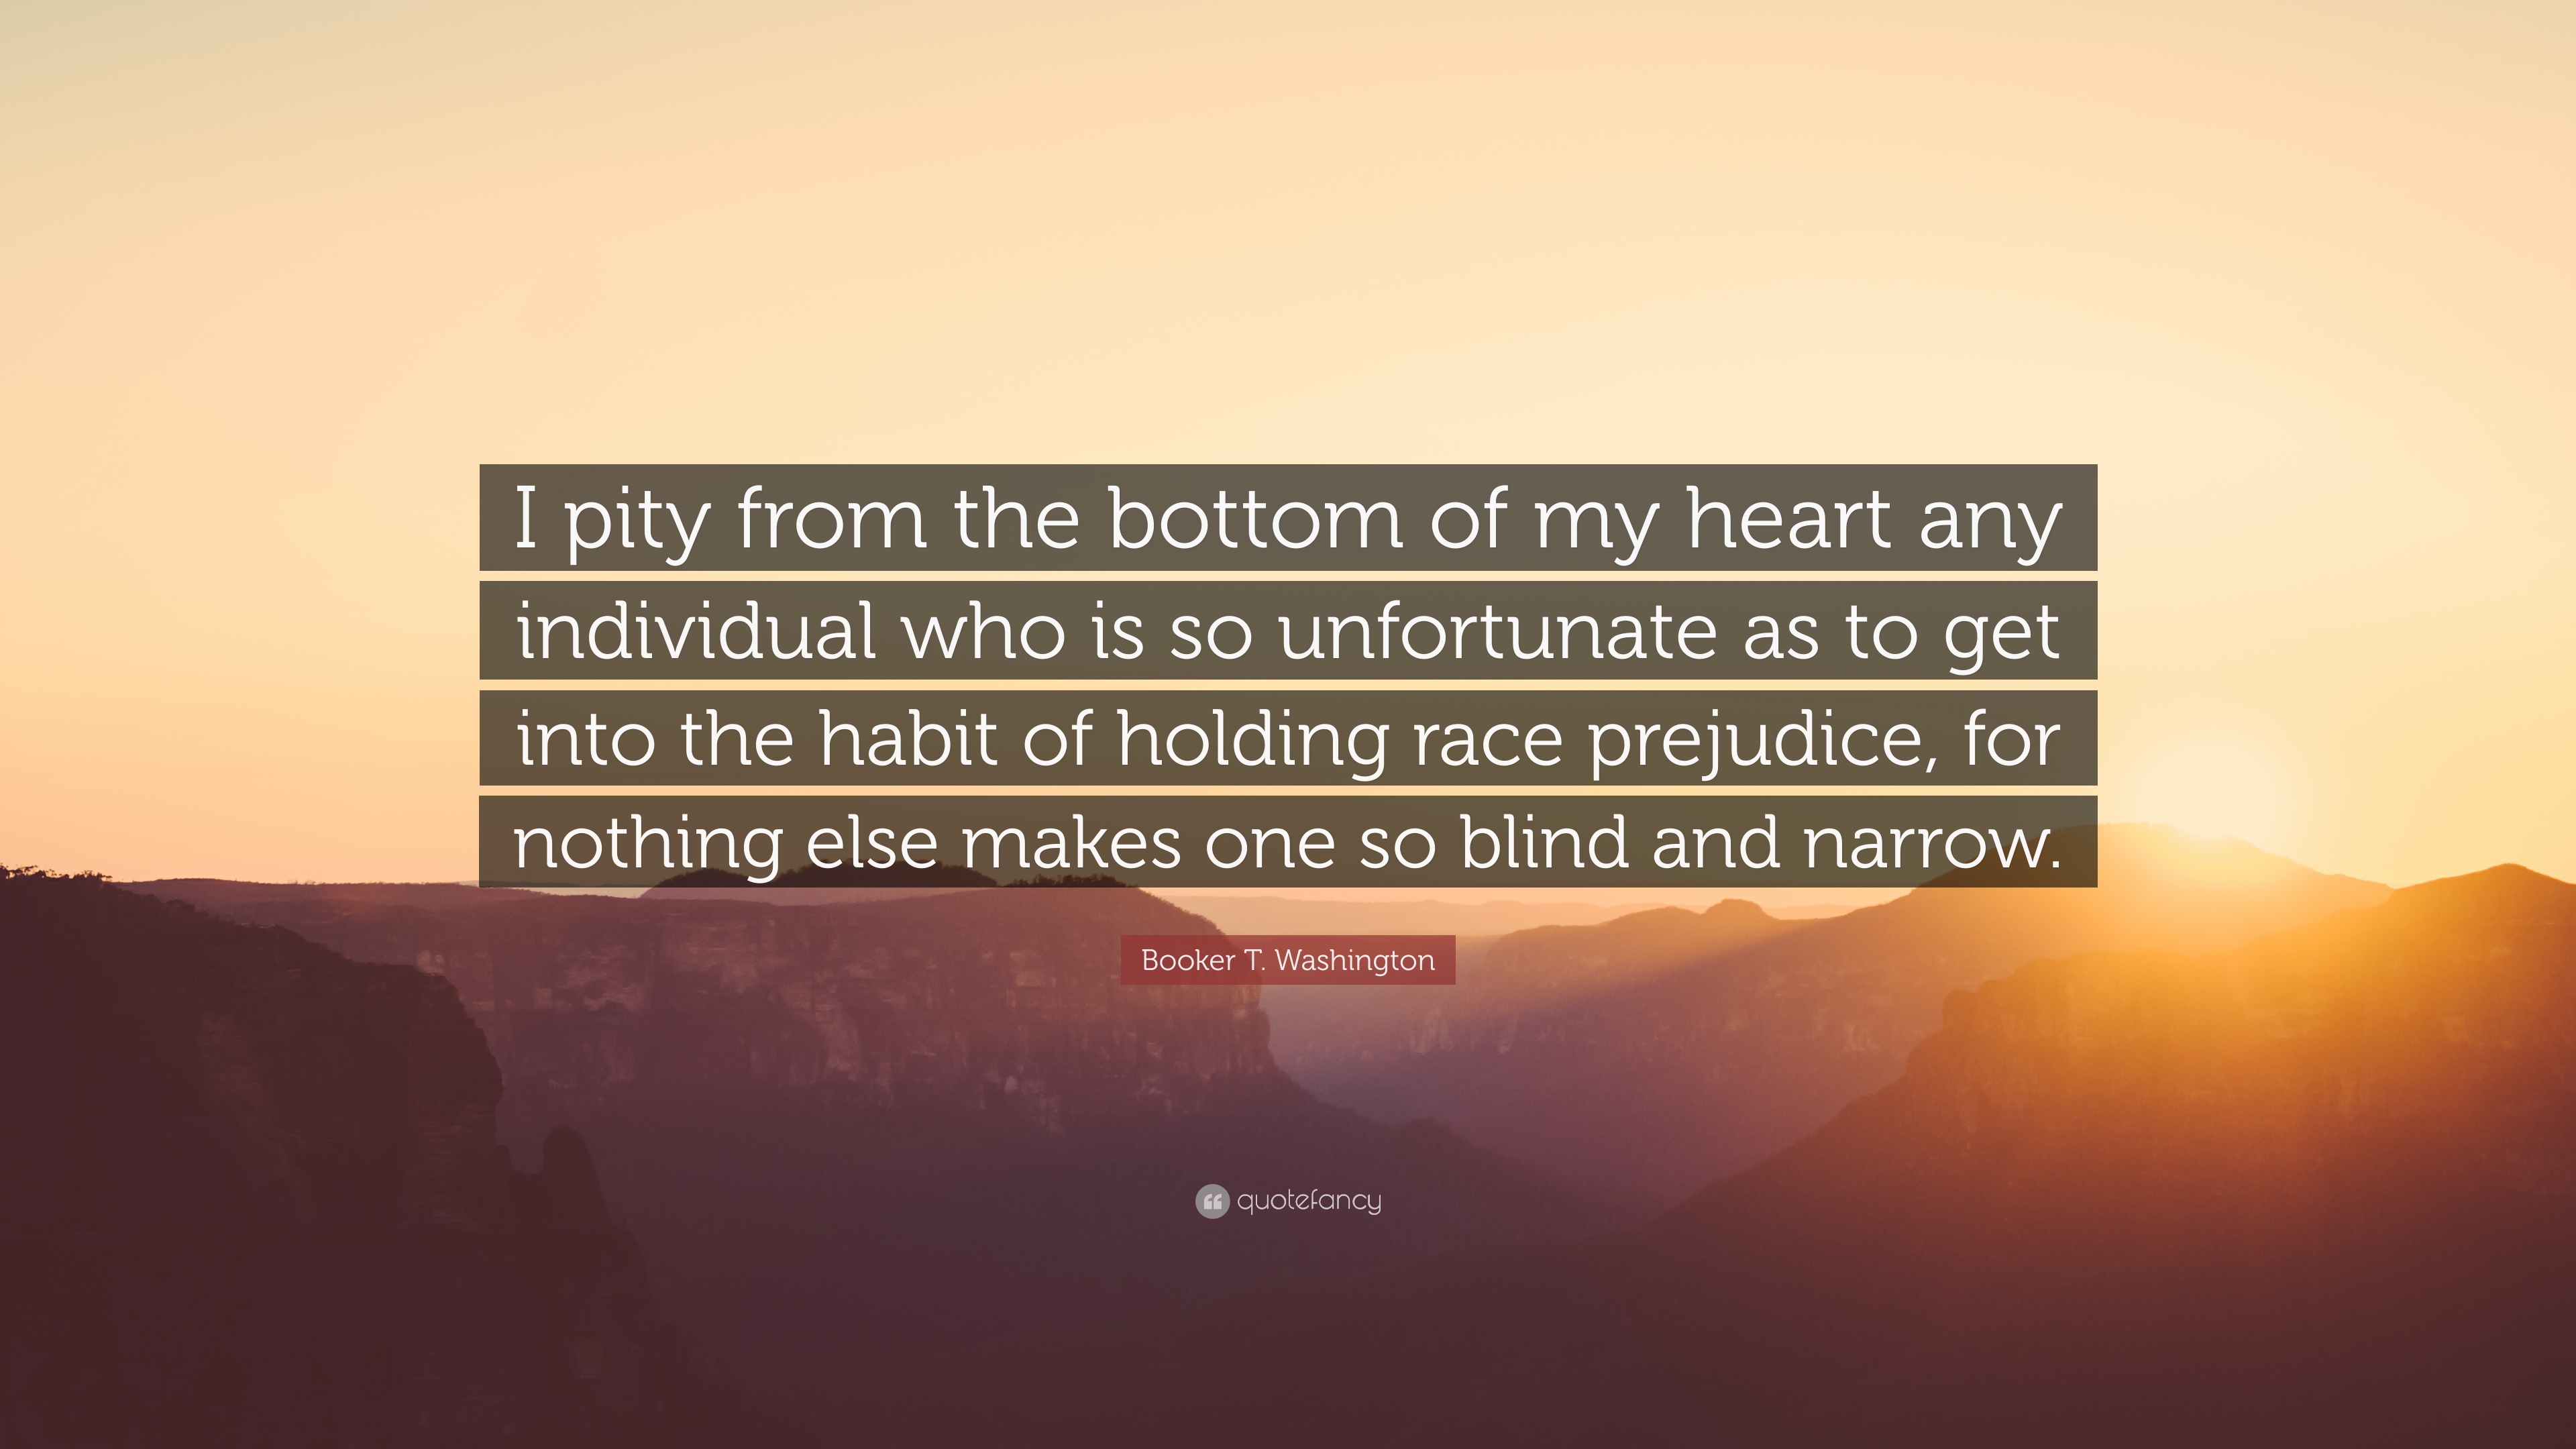 Booker T. Washington Quote: “I pity from the bottom of my heart any ...